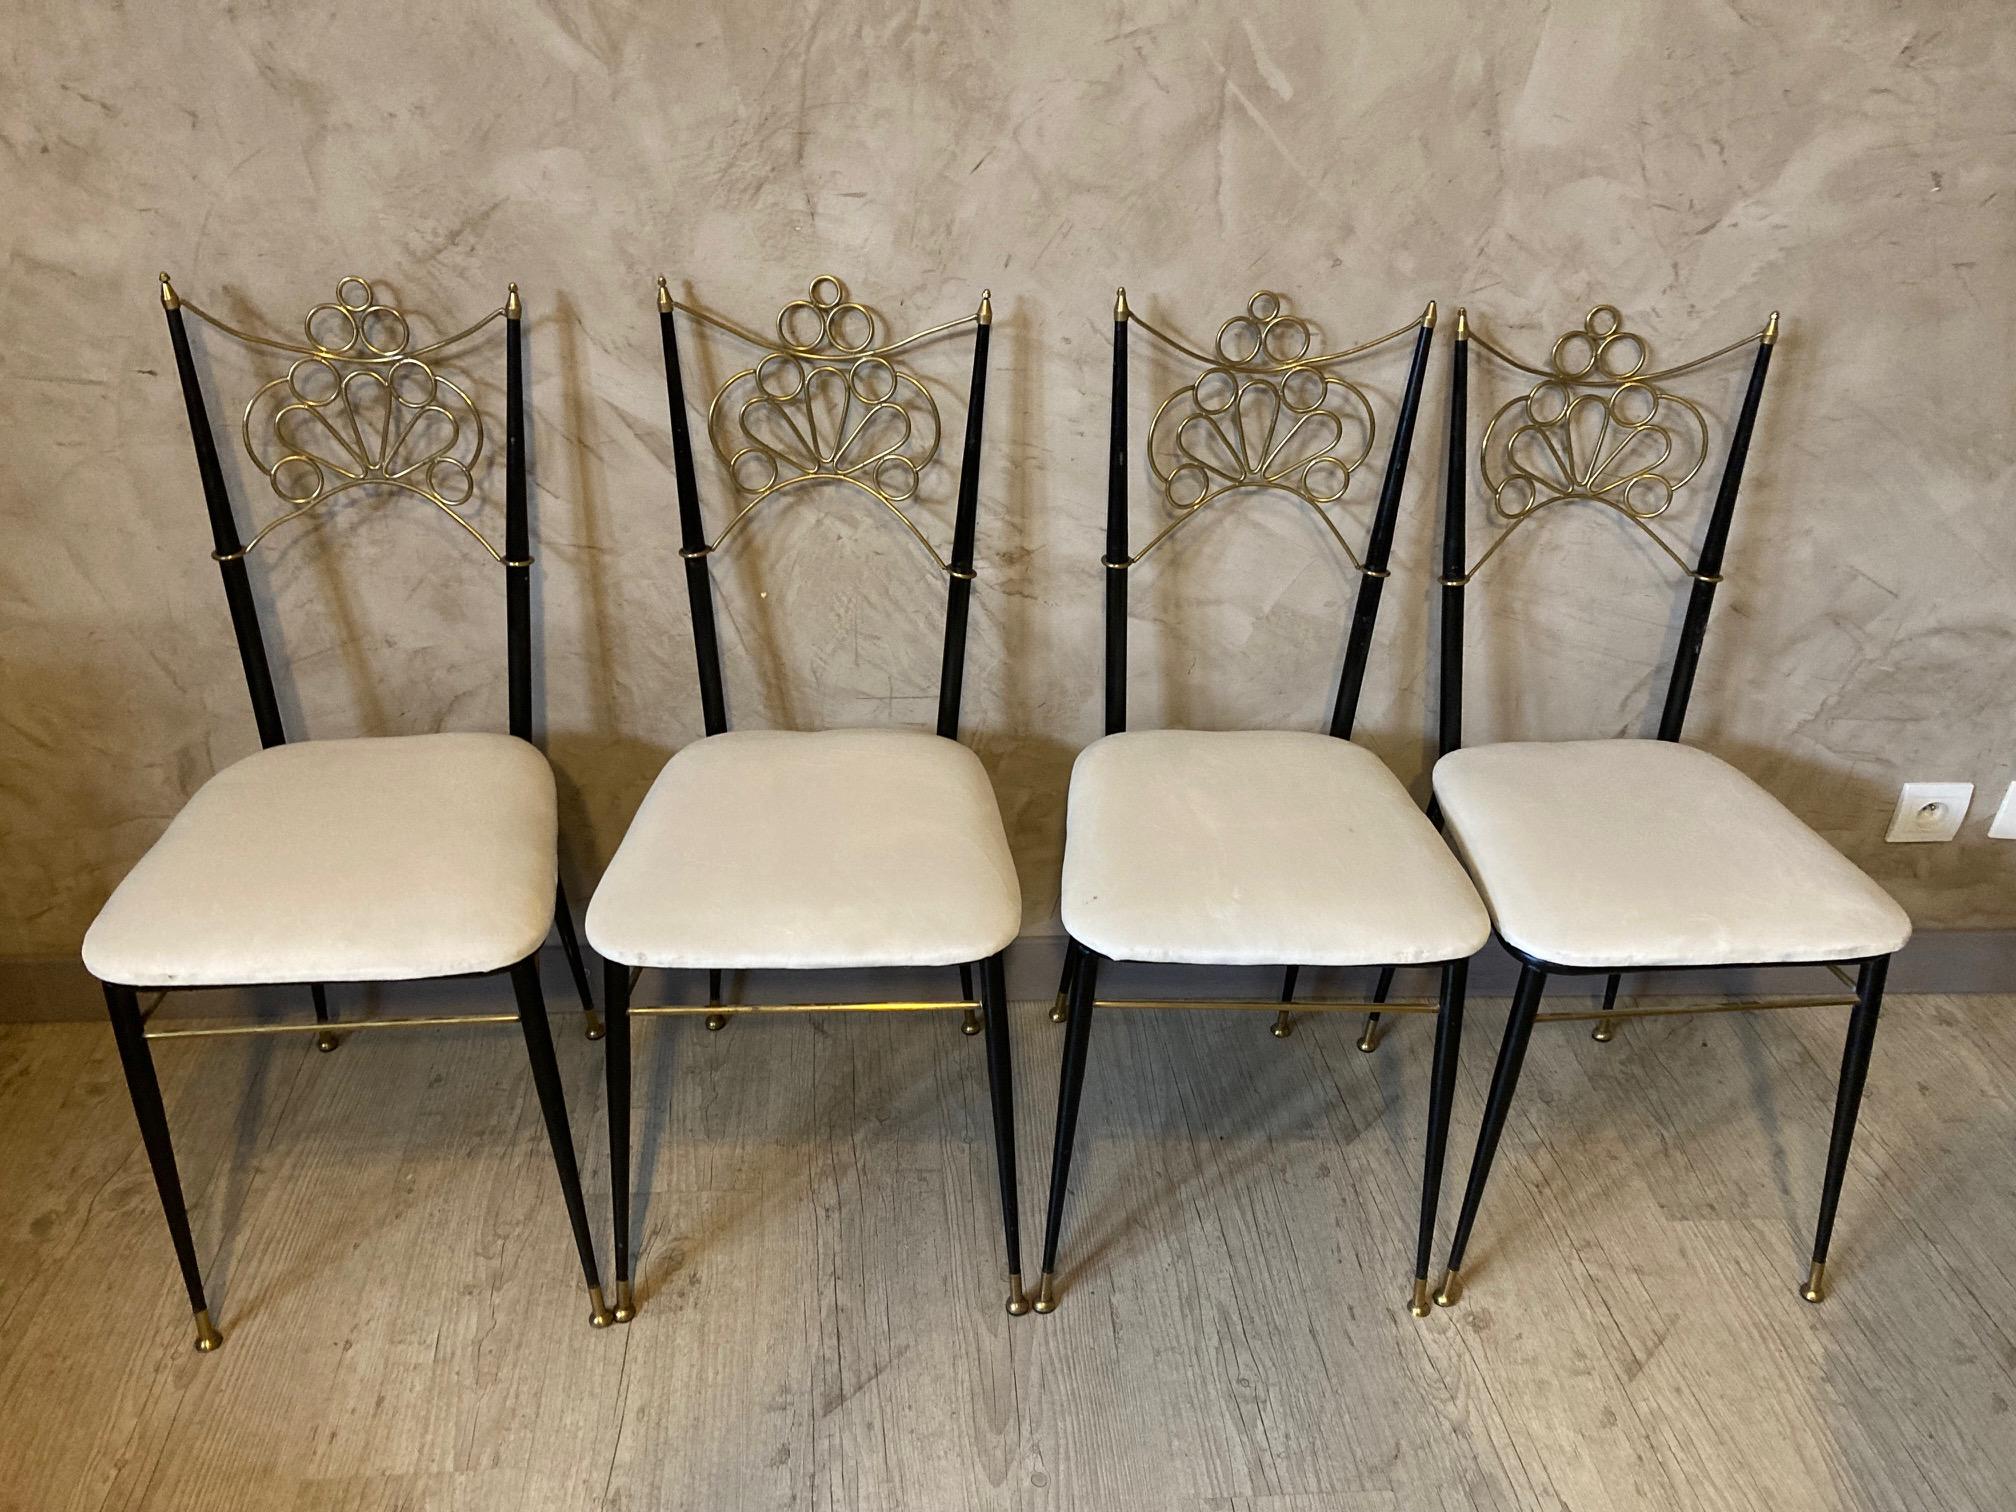 20th Century Marble, Metal and Brass Rounded Table with 4 Chairs, 1950s For Sale 1